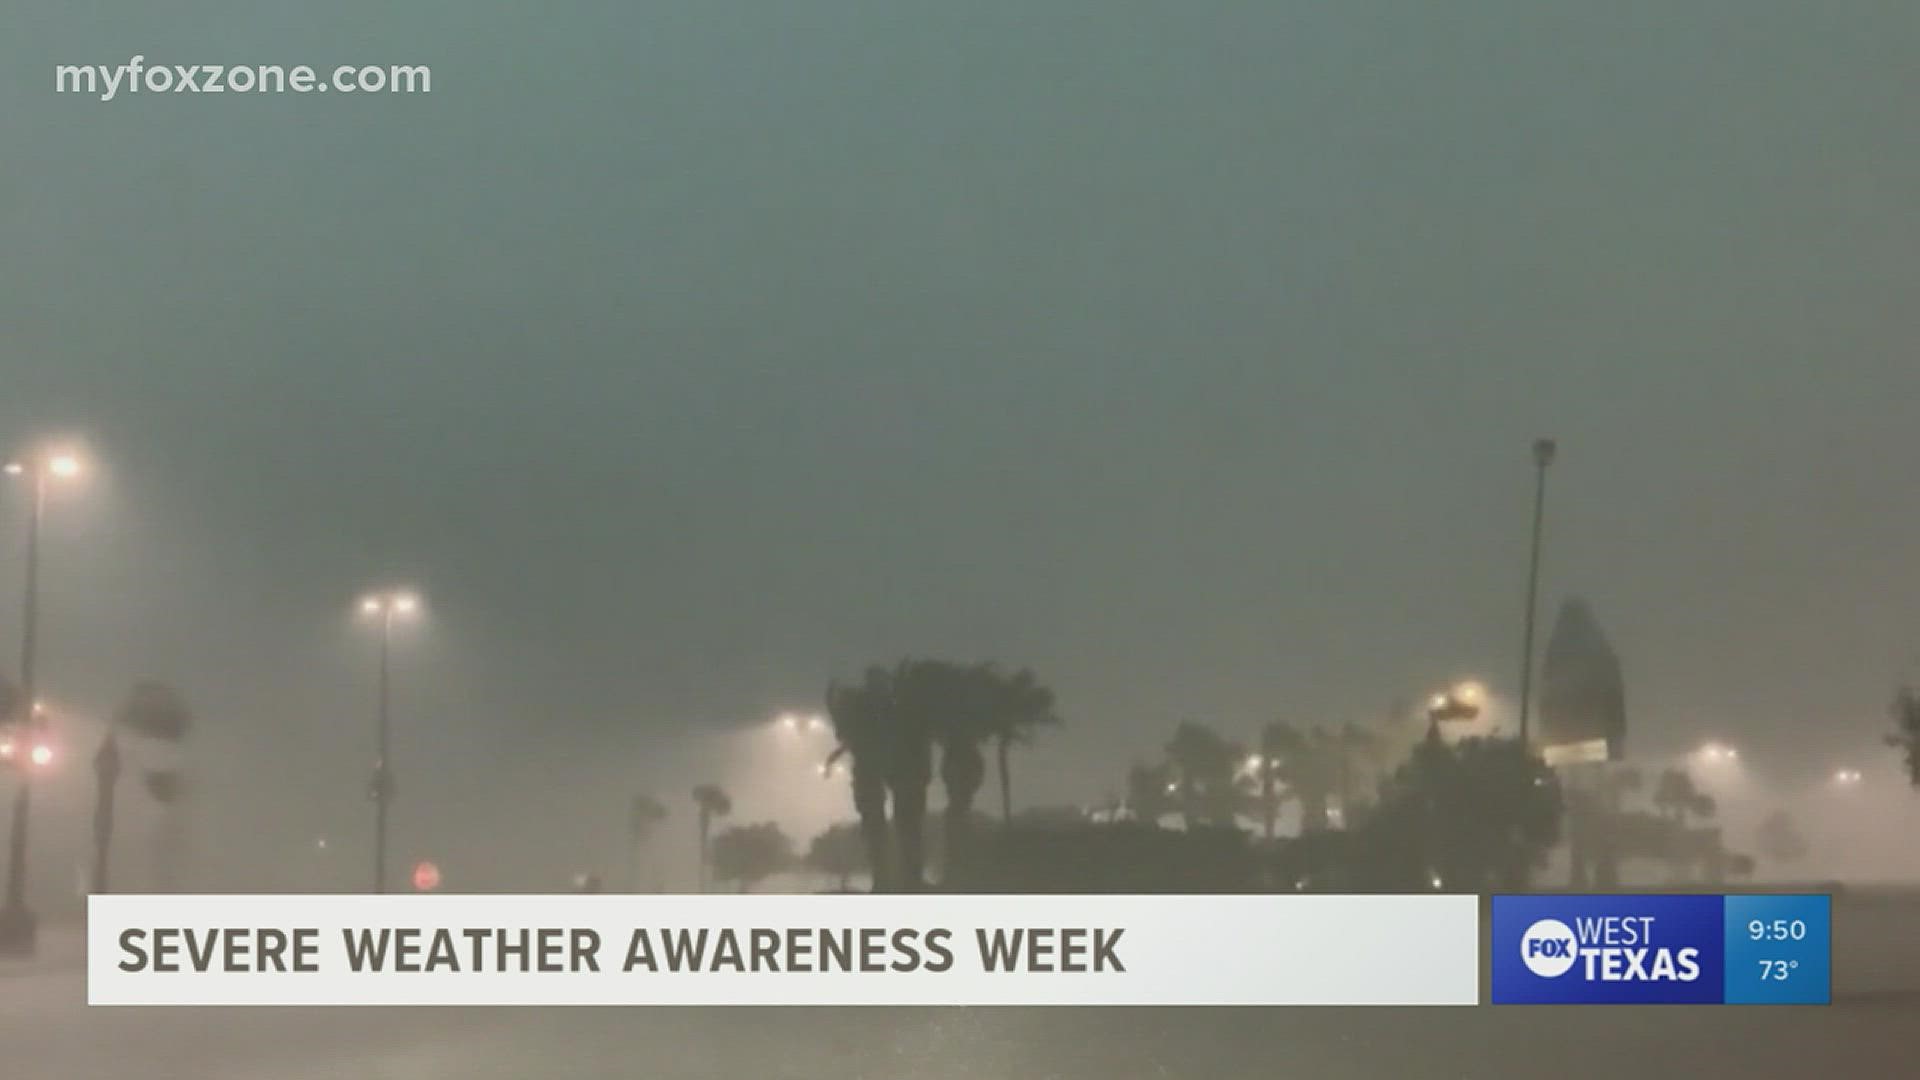 Severe Weather Awareness Week is dedicated to learn about different weather hazards.